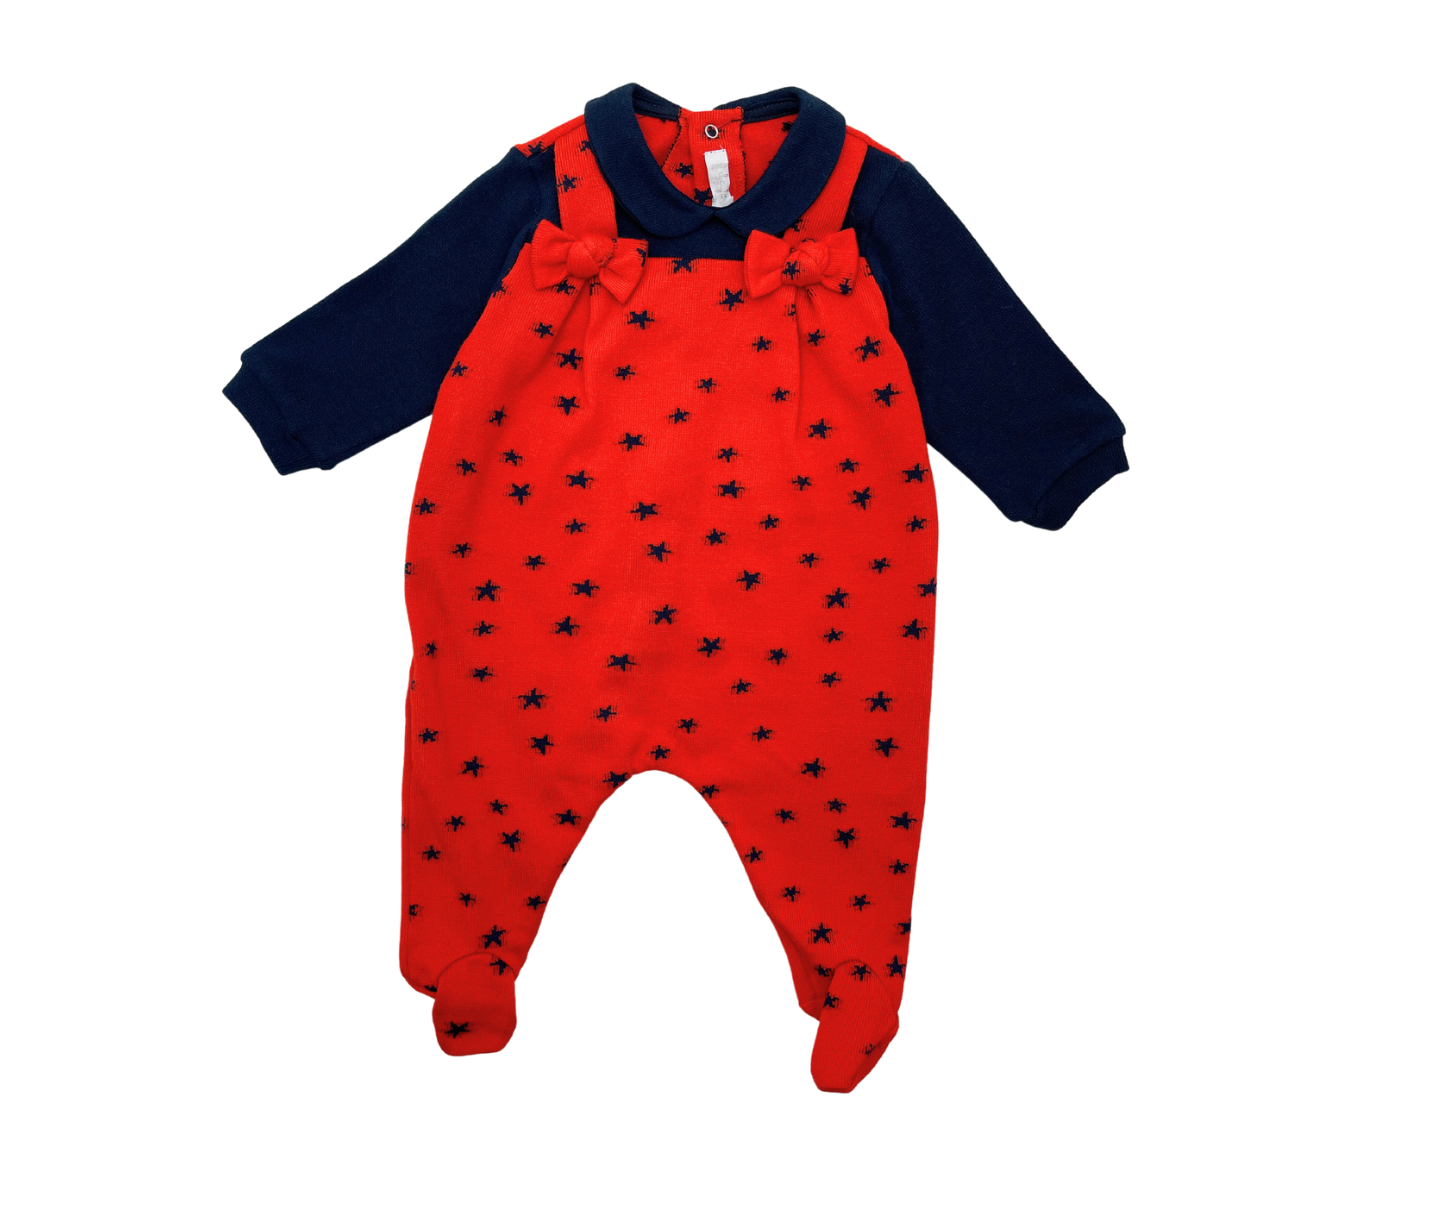 IL GUFO - Red jumpsuit with stars - 3 months